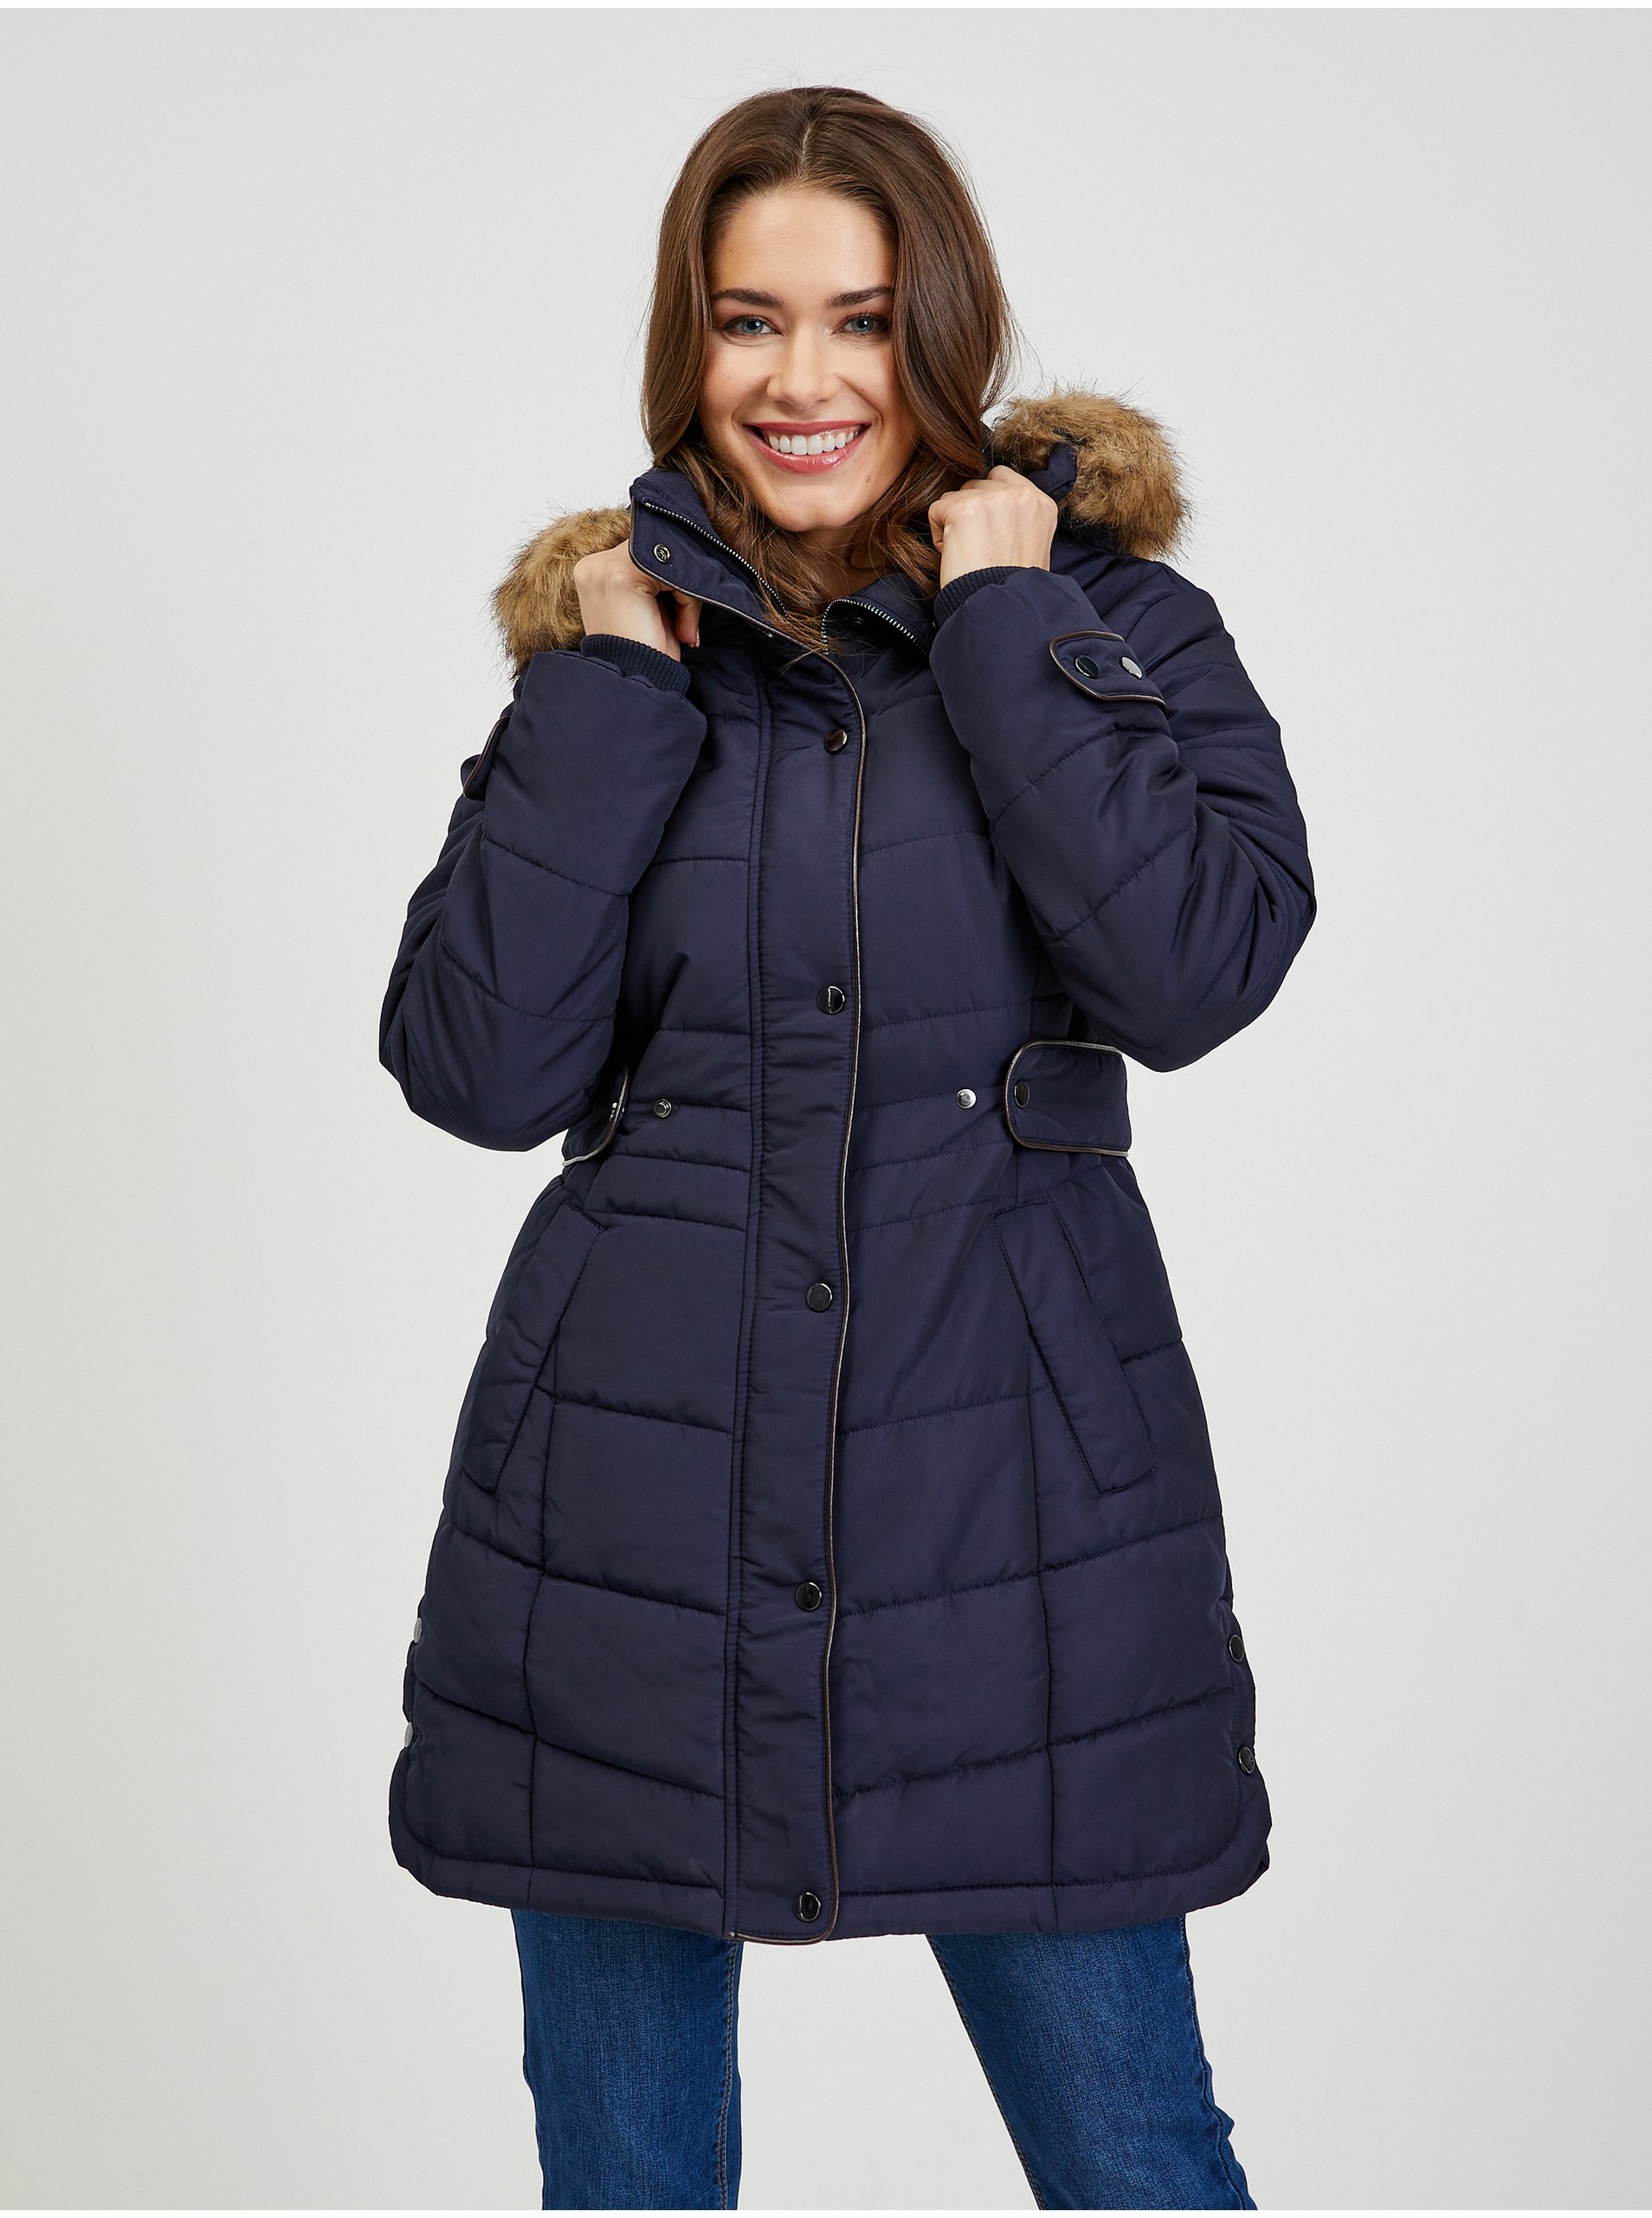 Orsay Dark Blue Women's Quilted Winter Coat With Detachable Hood With Fur - Women